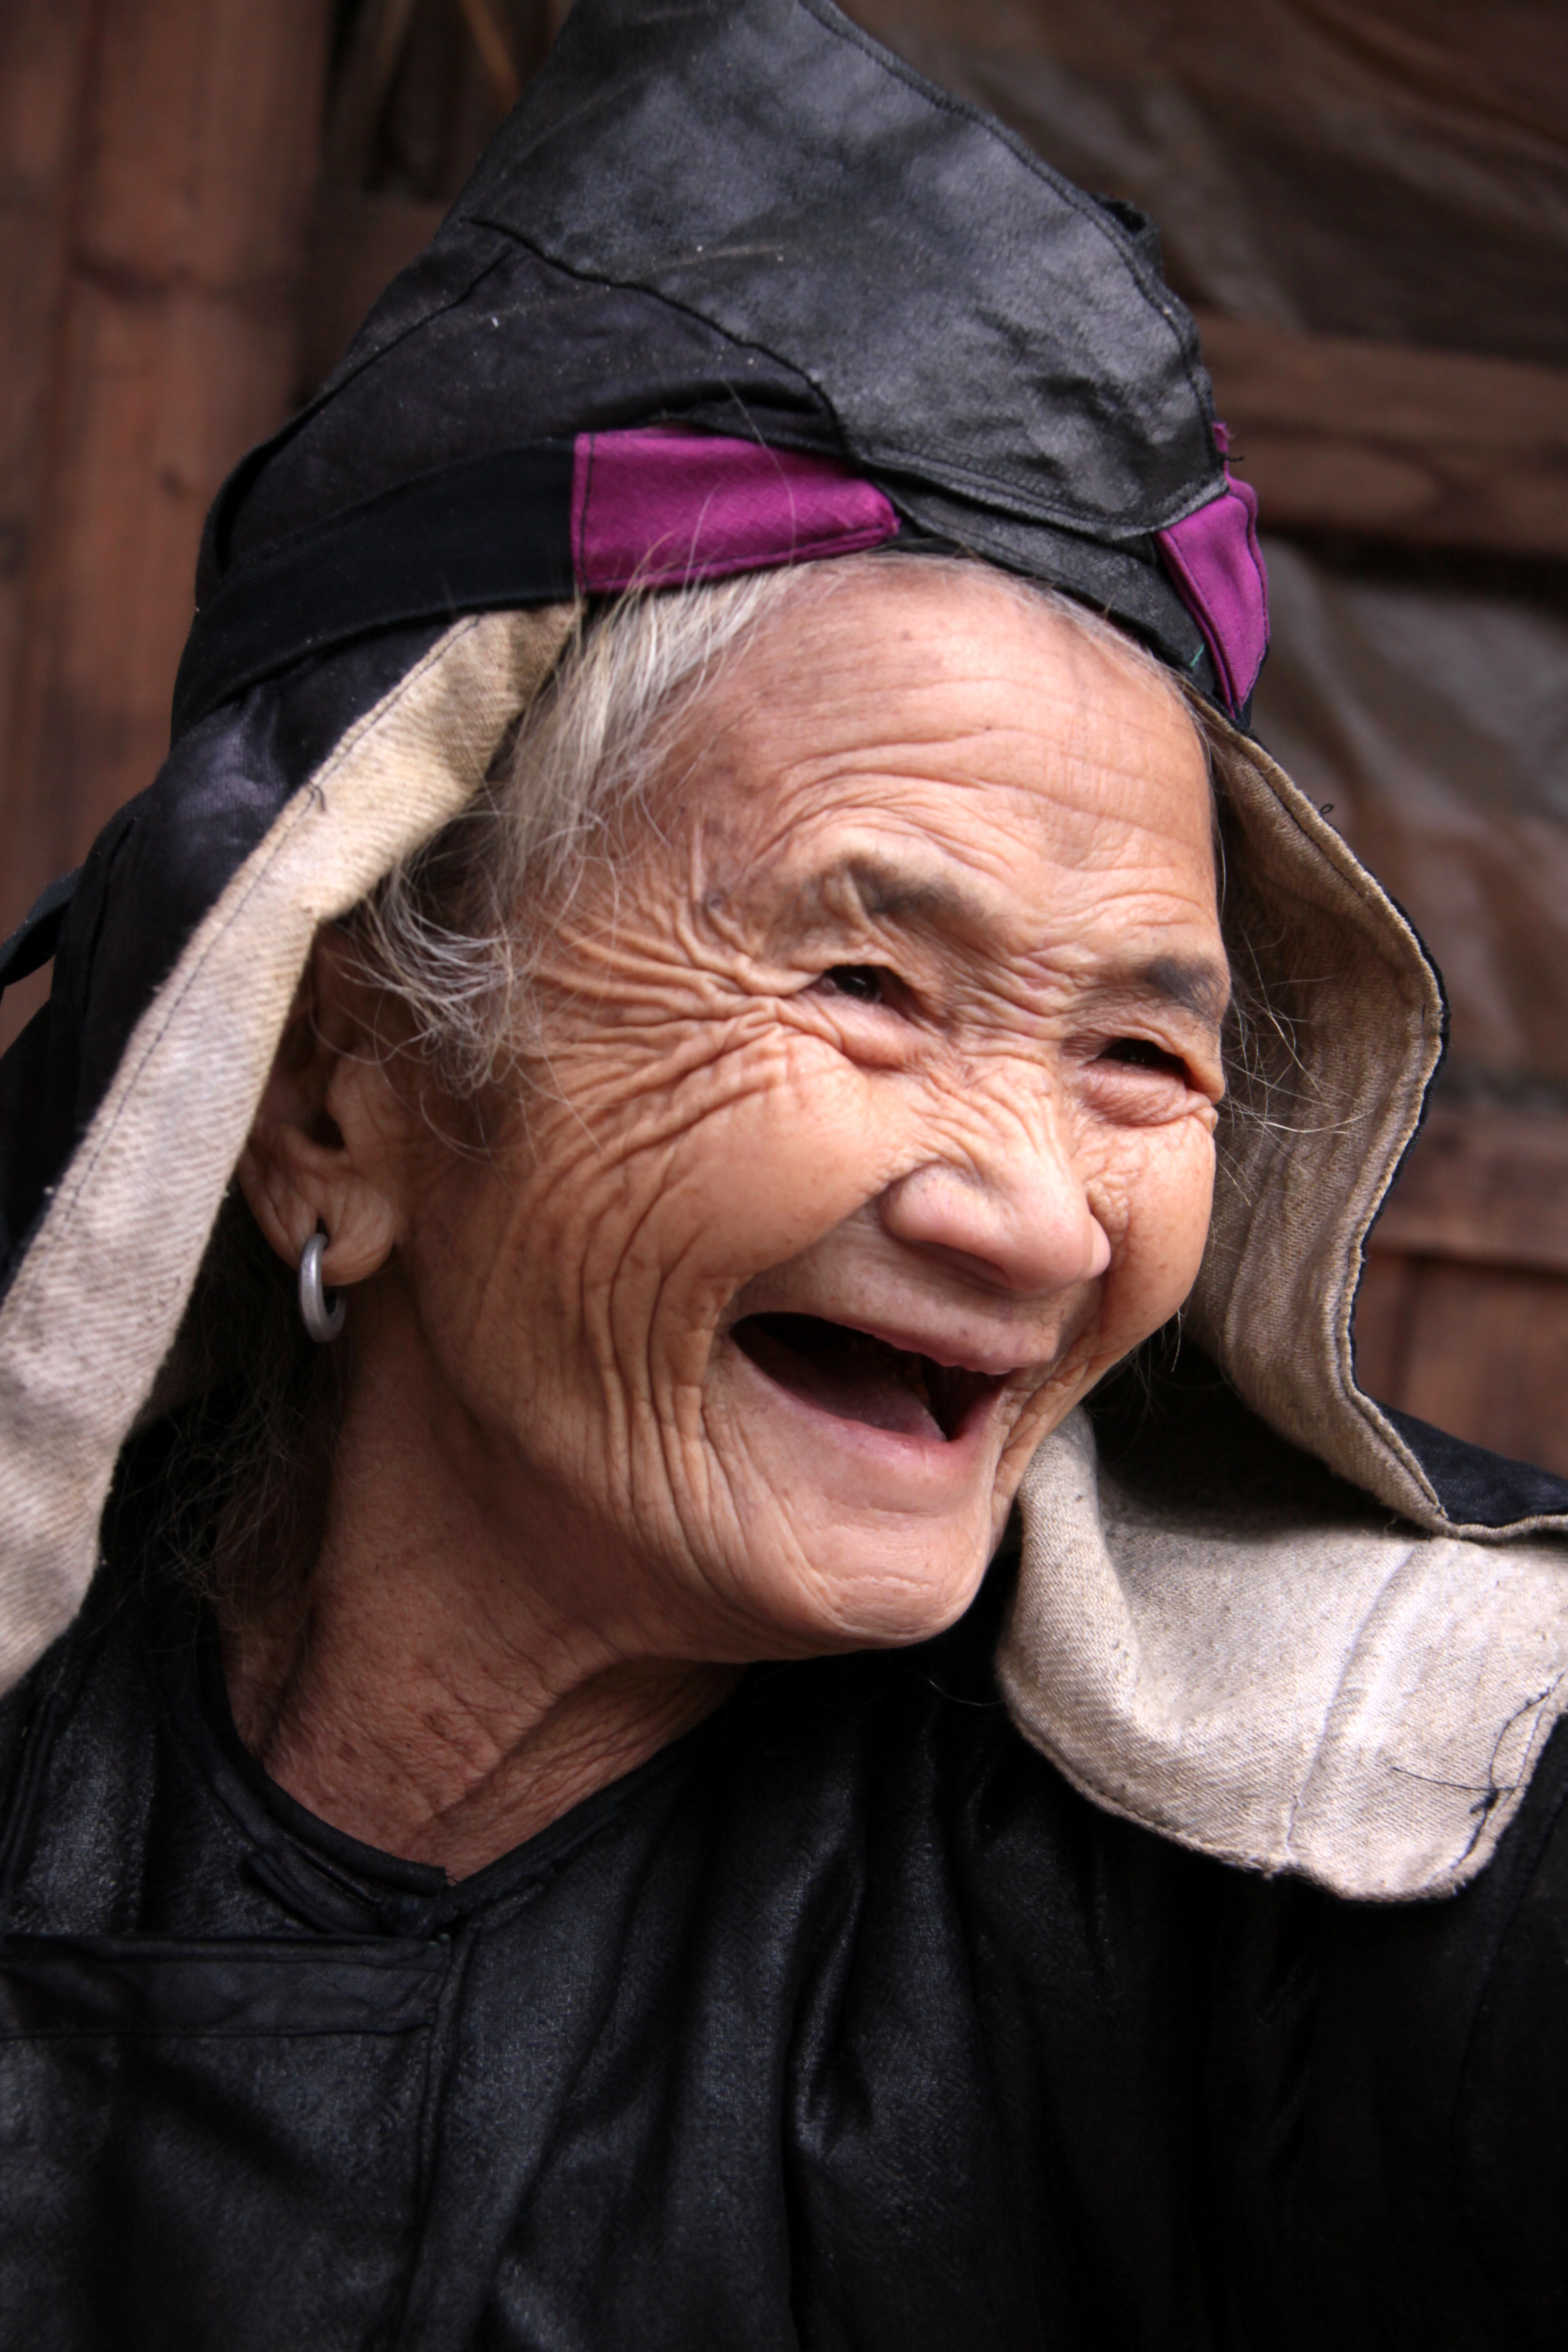 Smiles from china... photo